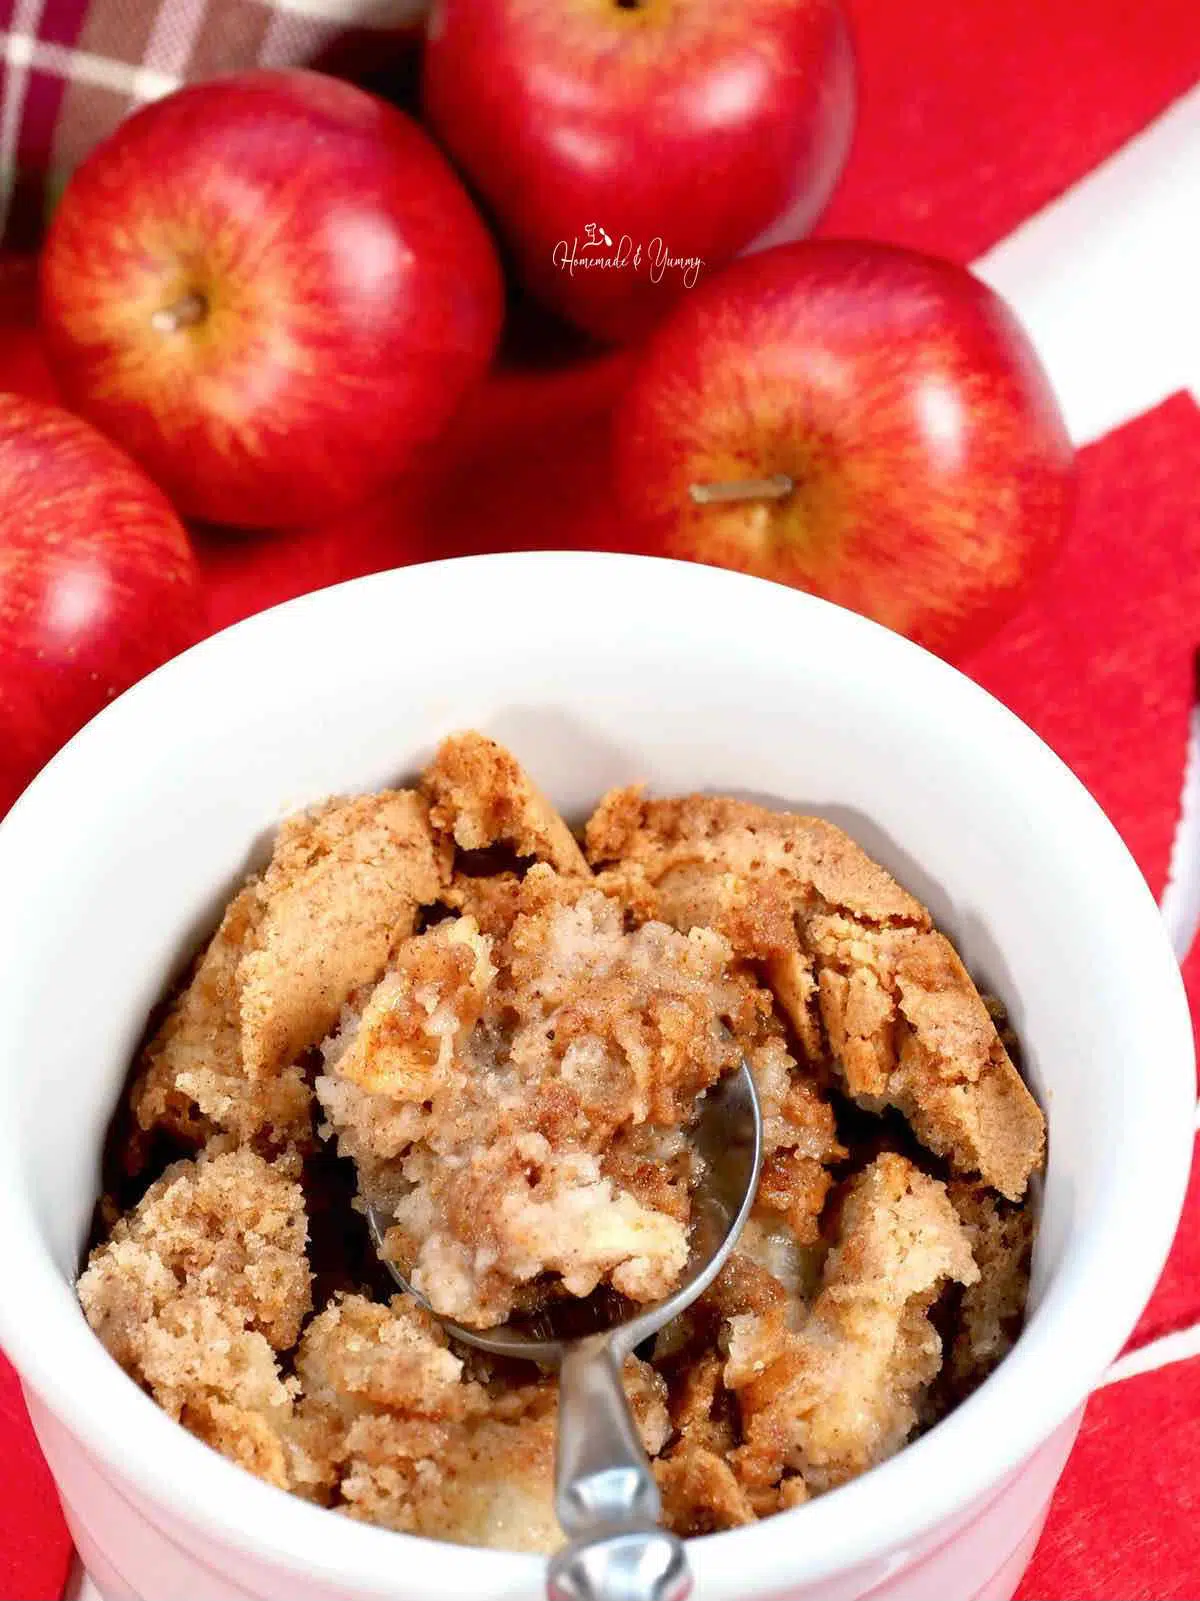 A spoonful of old fashioned apple pudding.